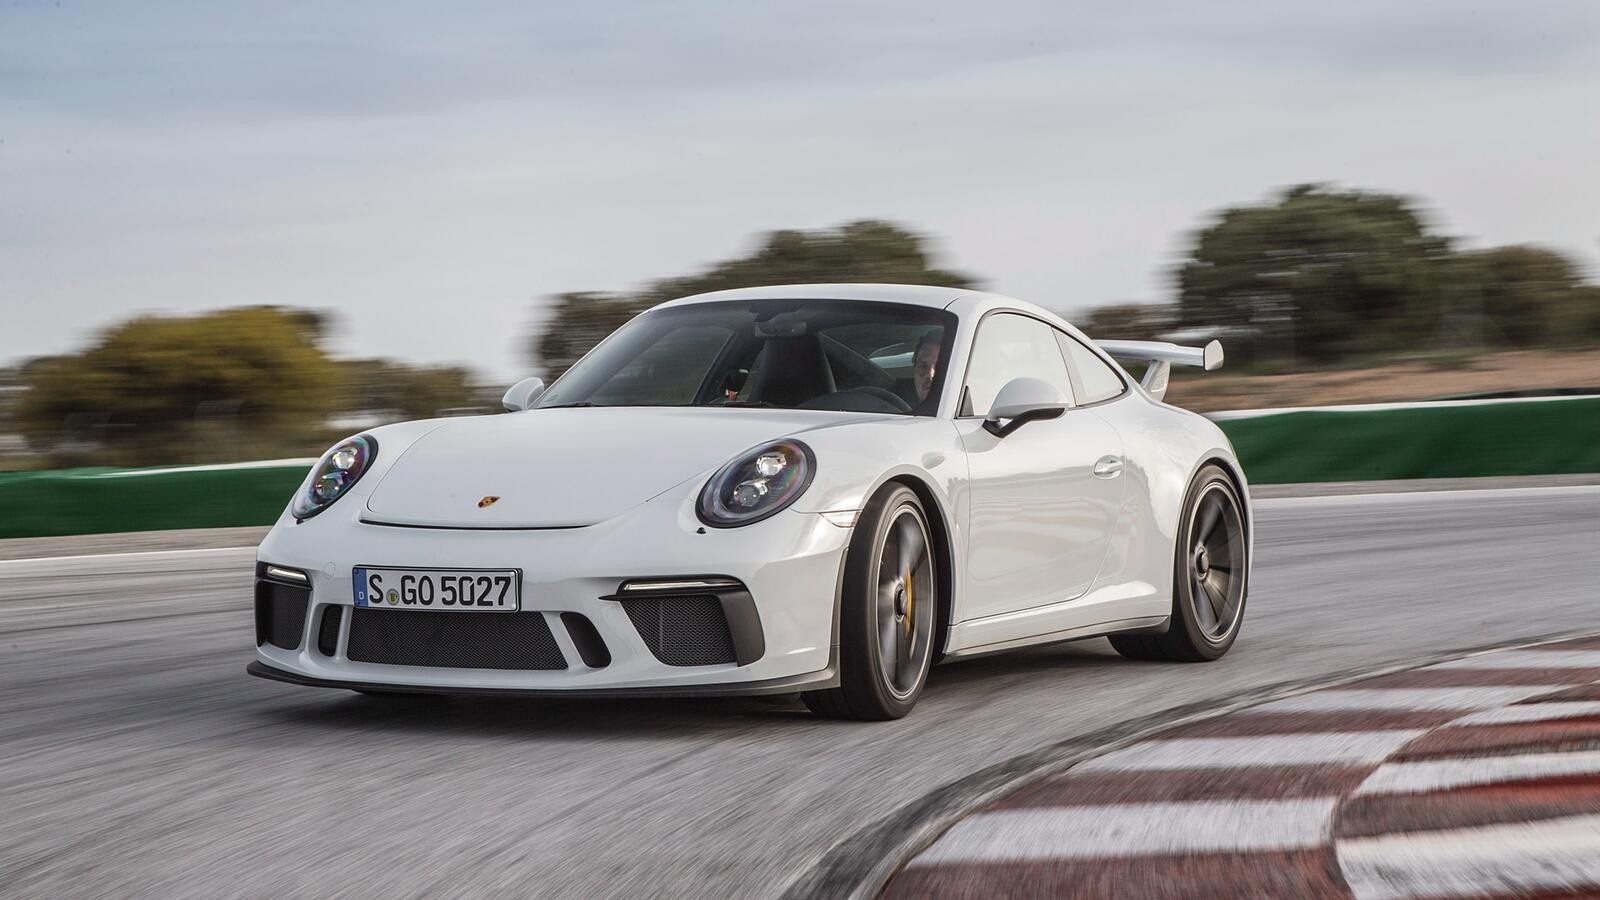 Free photo White porsche 911 gt3 rs coming out of the corner